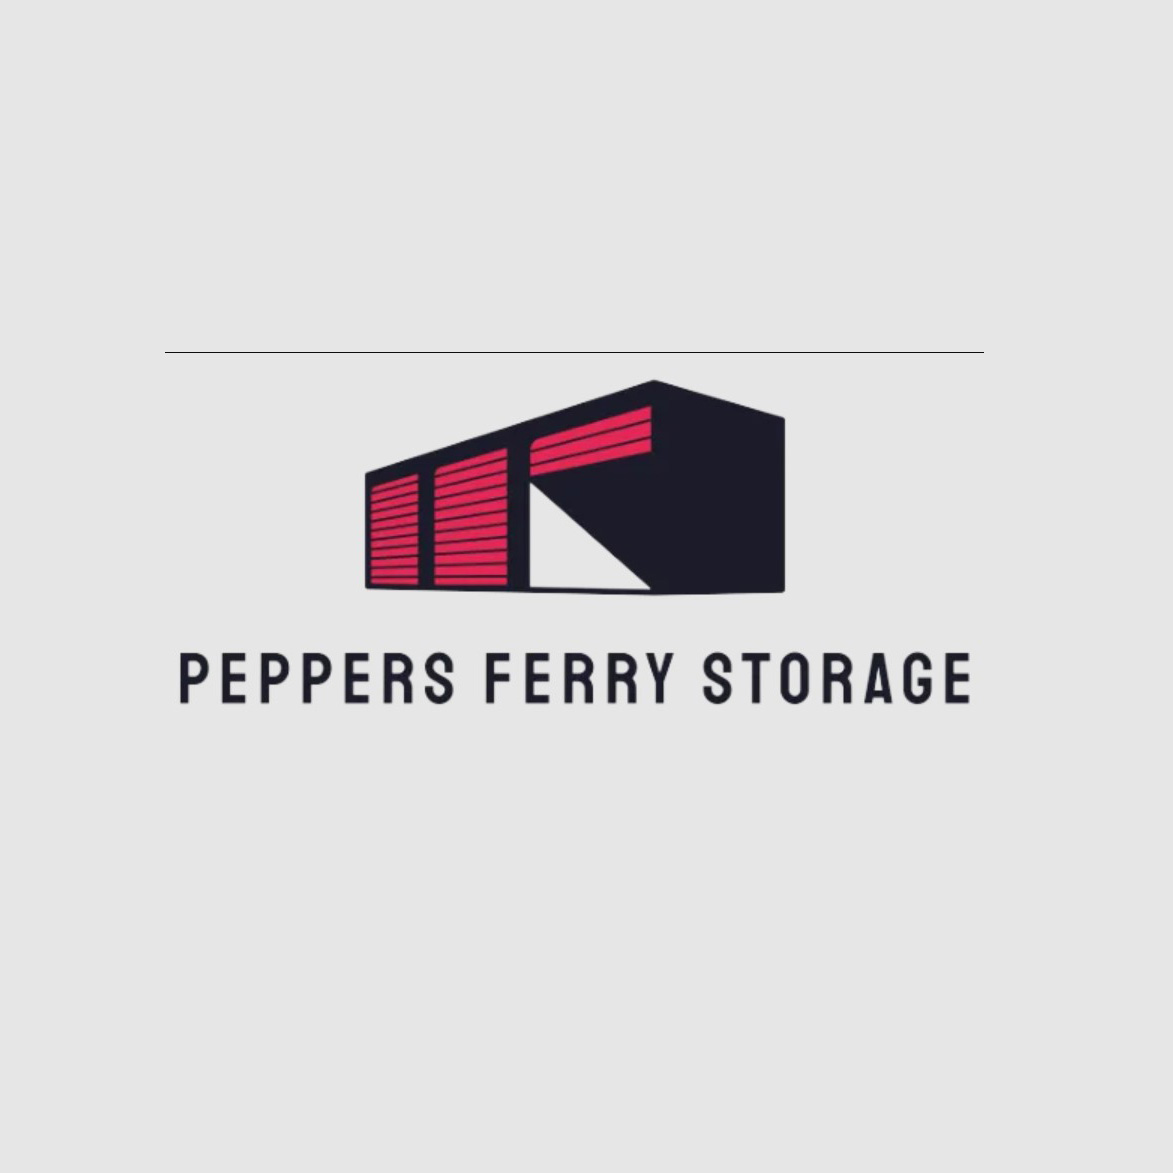 Peppers Ferry Storage